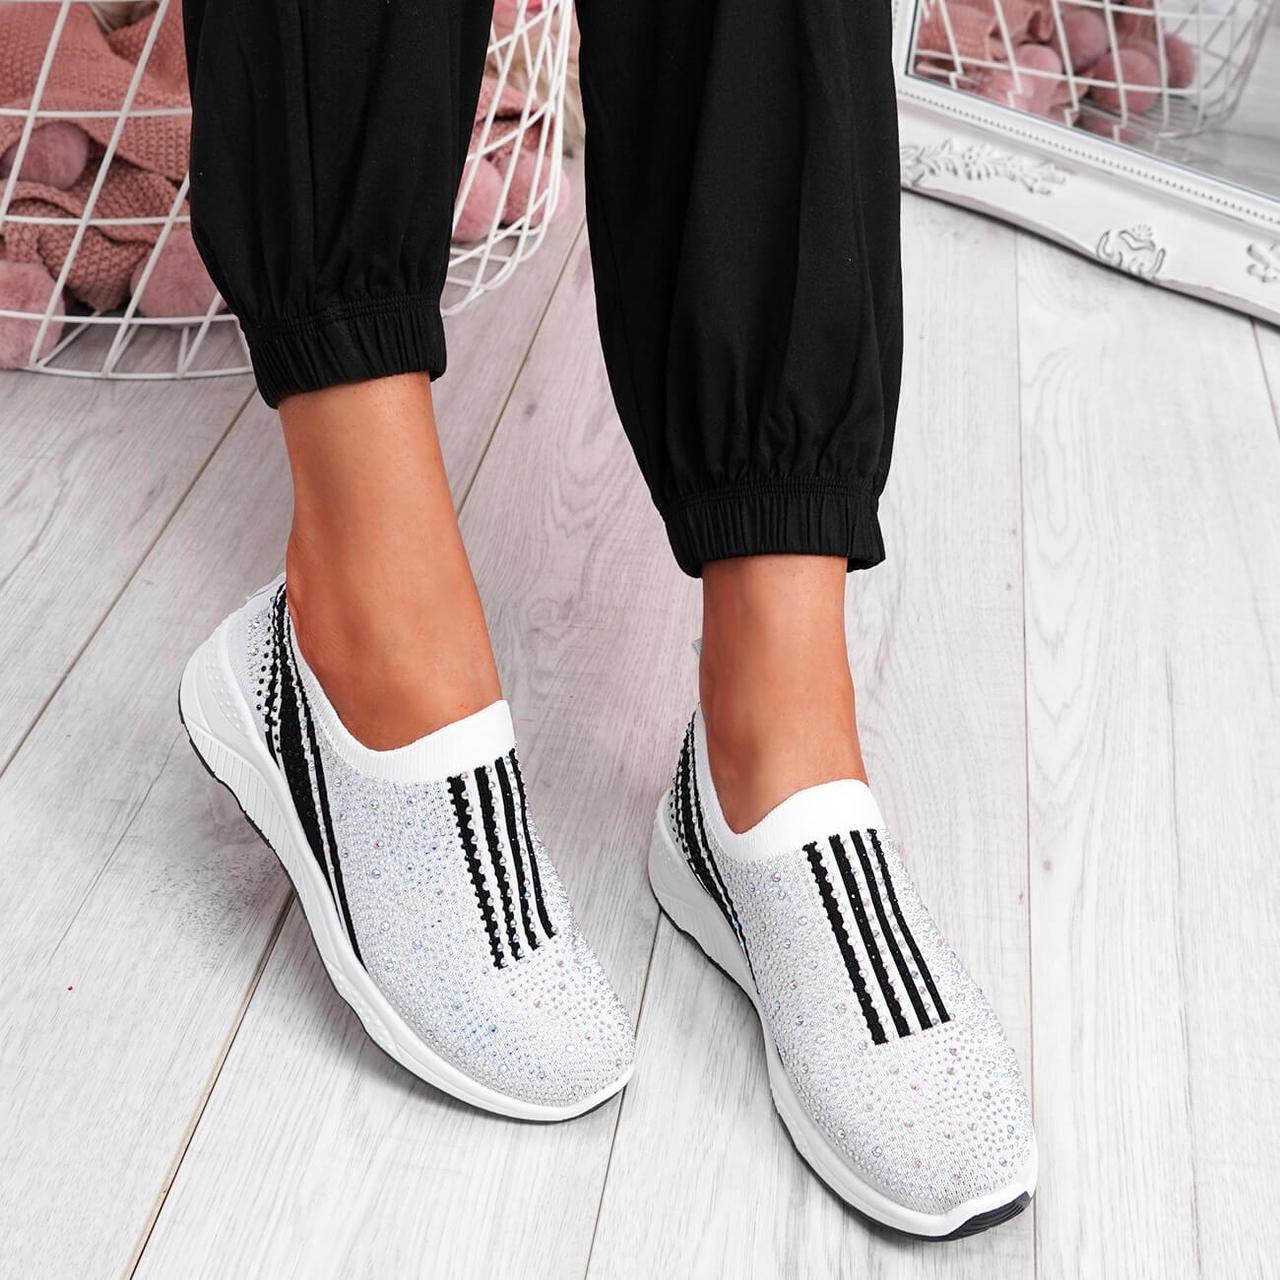 Fly-Woven Fabric Sneakers .*